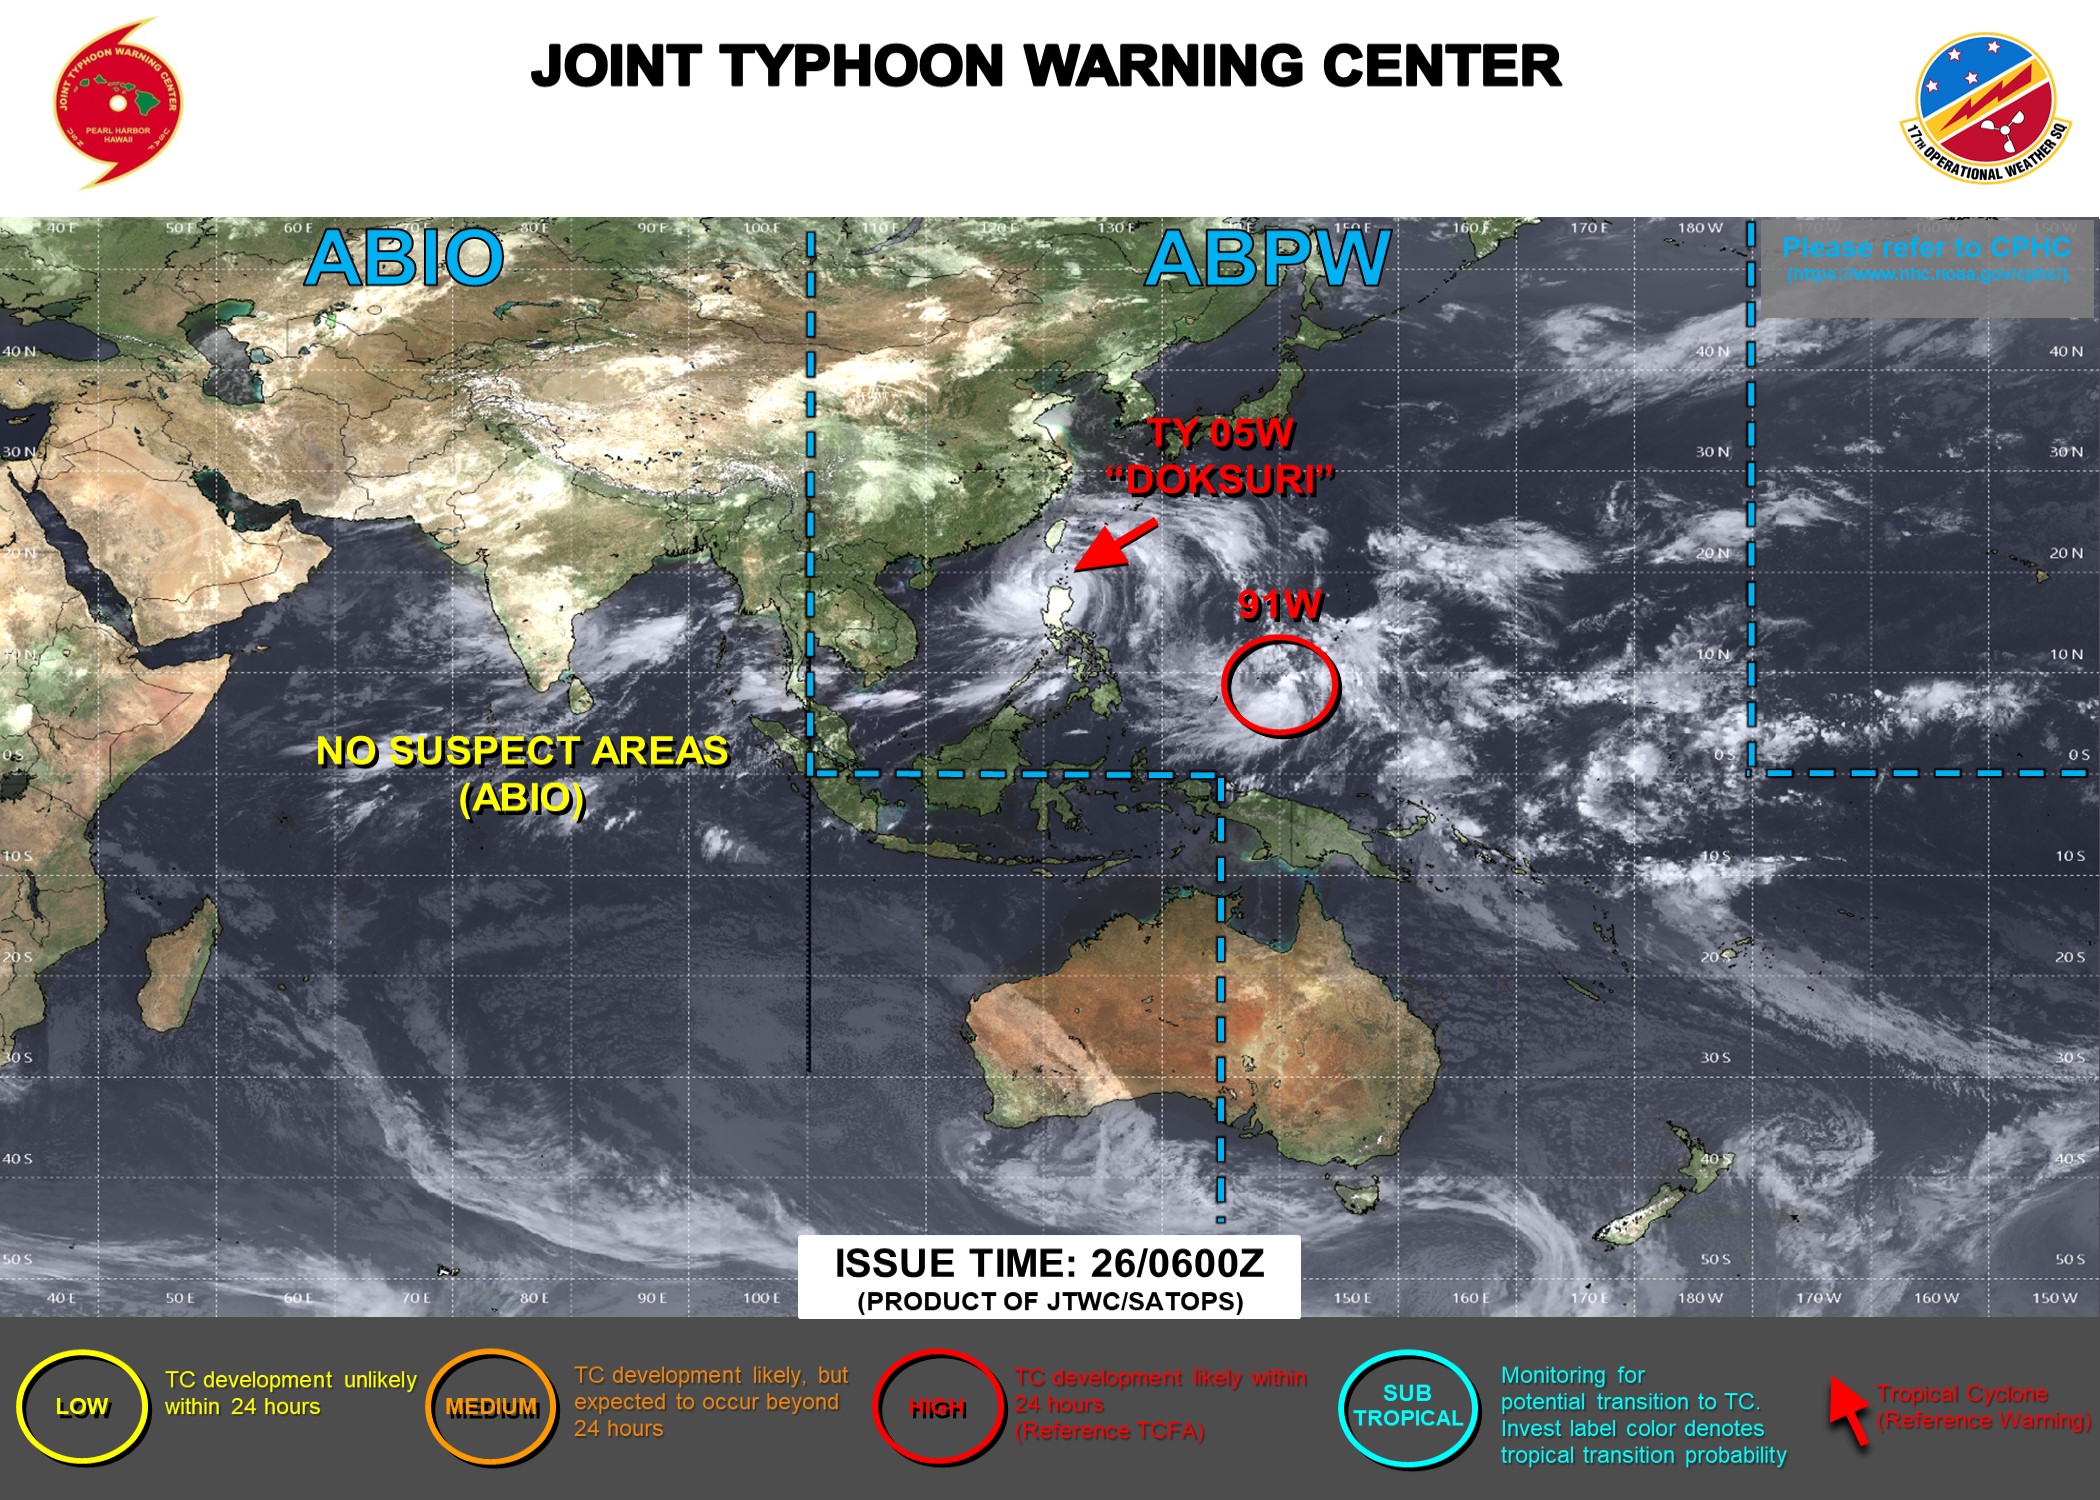 JTWC IS ISSUING 6HOURLY WARNINGS AND 3HOURLY SATELLITE BULLETINS ON TY 05W(DOKSURI). 3HOURLY SATELLITE BULLETINS ARE ISSUED ON INVEST 94B.